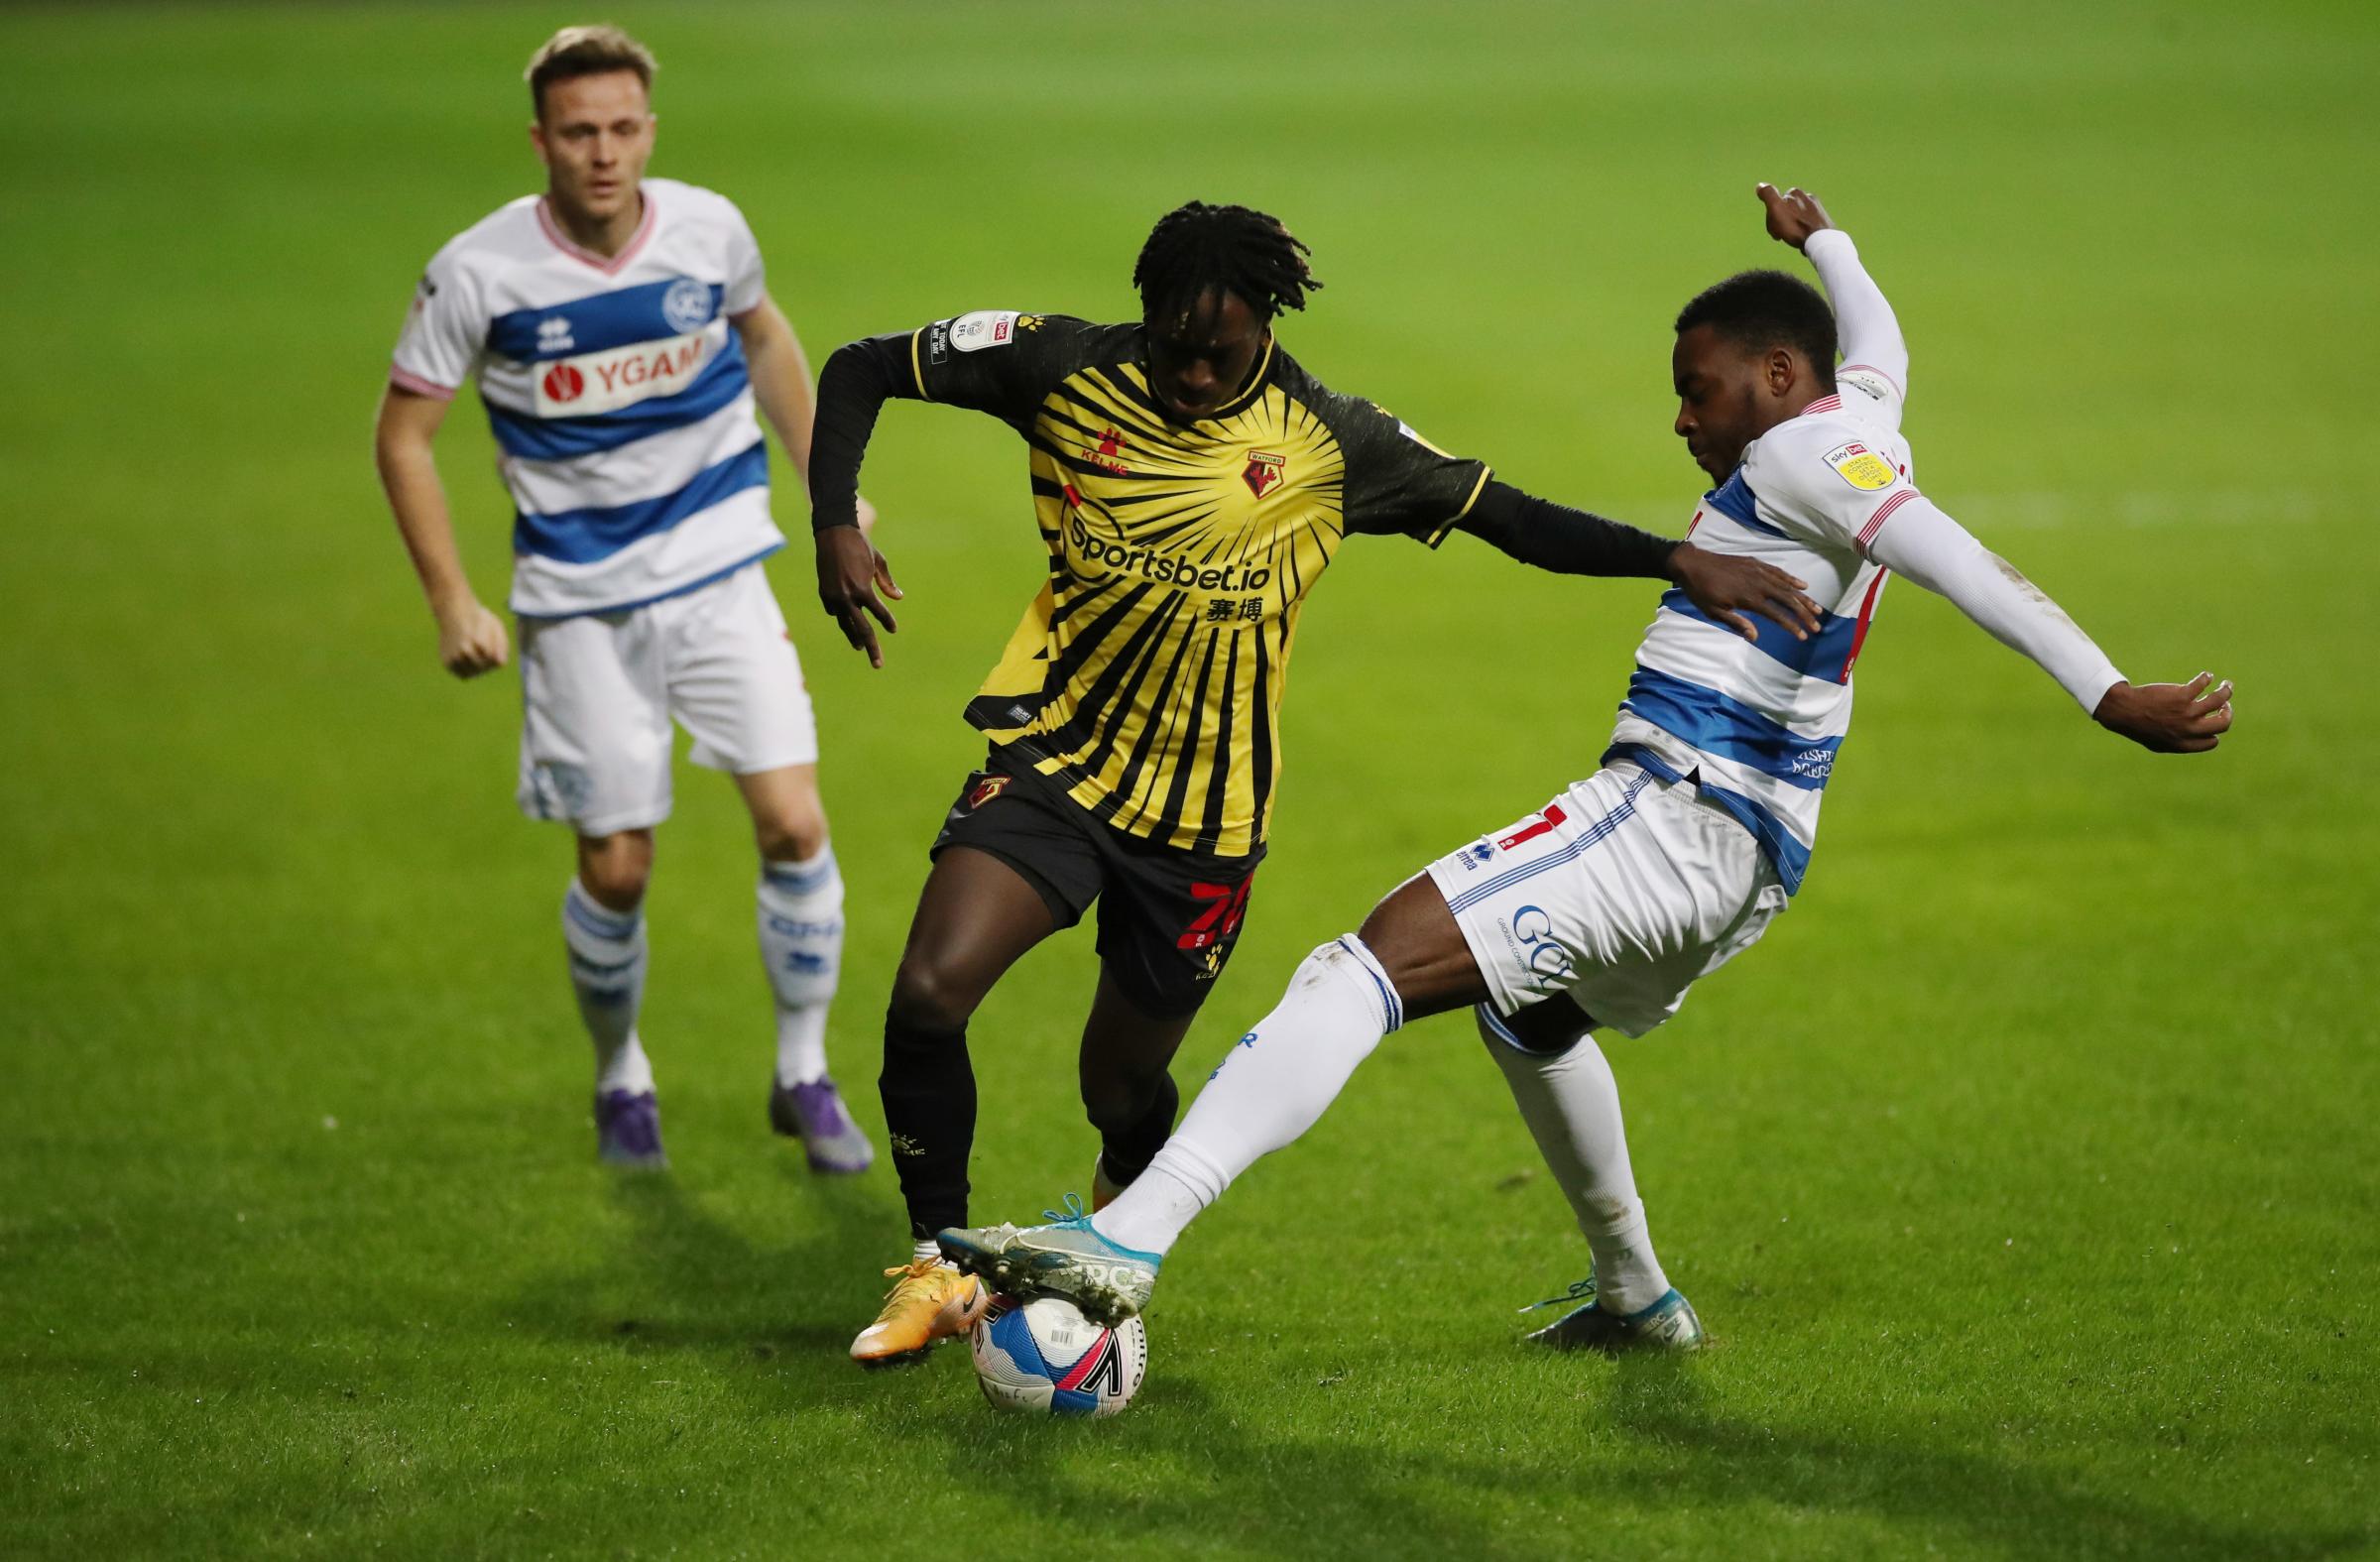 Watford recall Quina and send him to Rotherham on loan